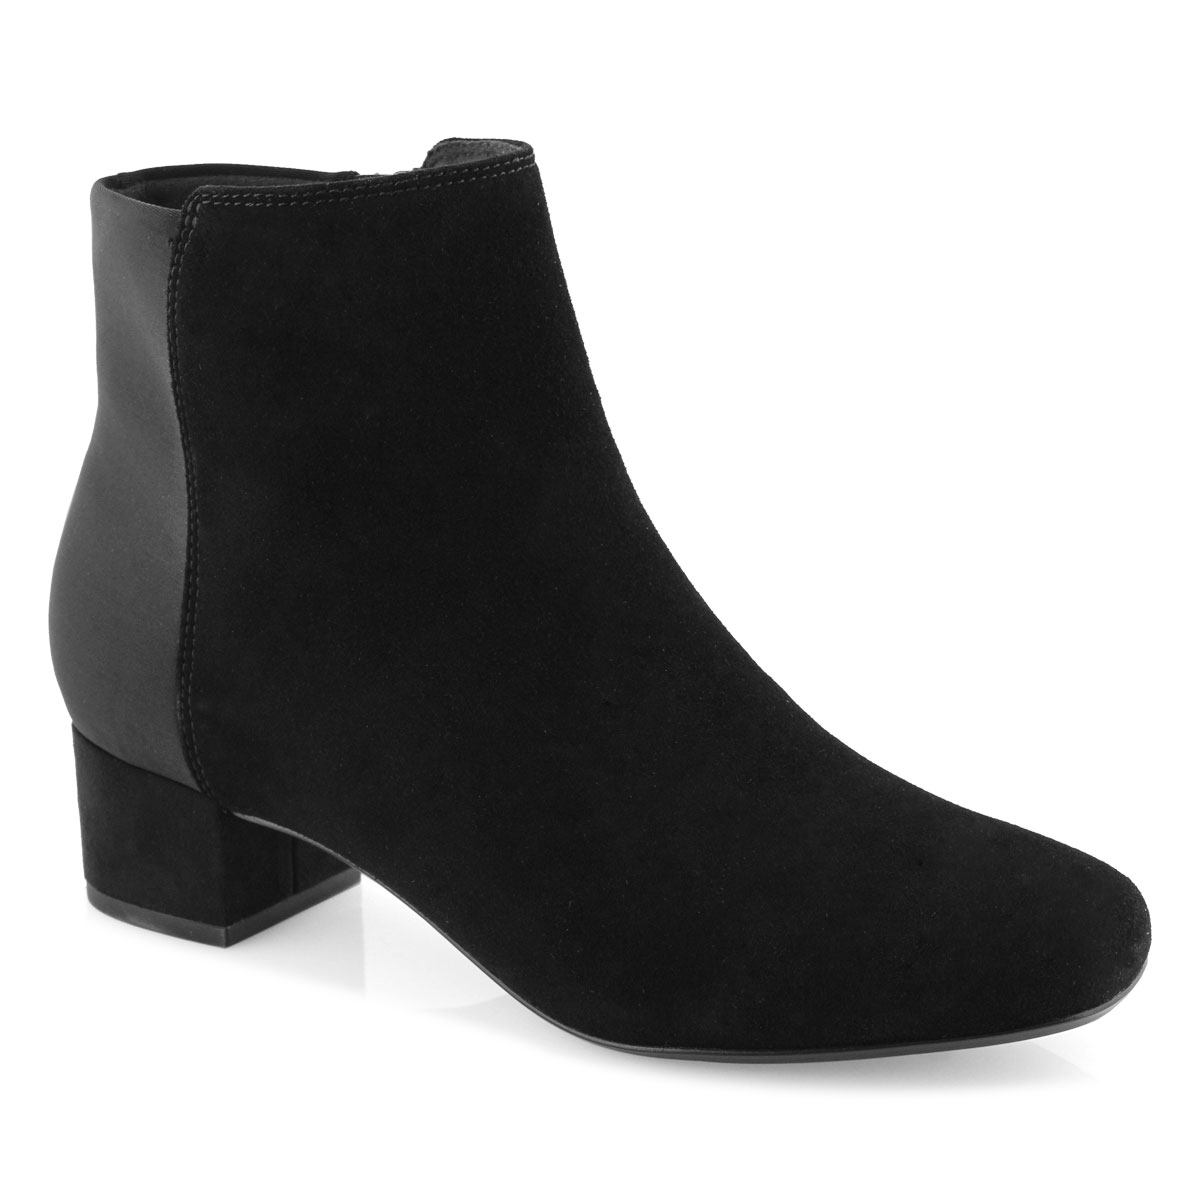 Clarks Women's Chartli Valley Suede Boot - Bl | SoftMoc.com